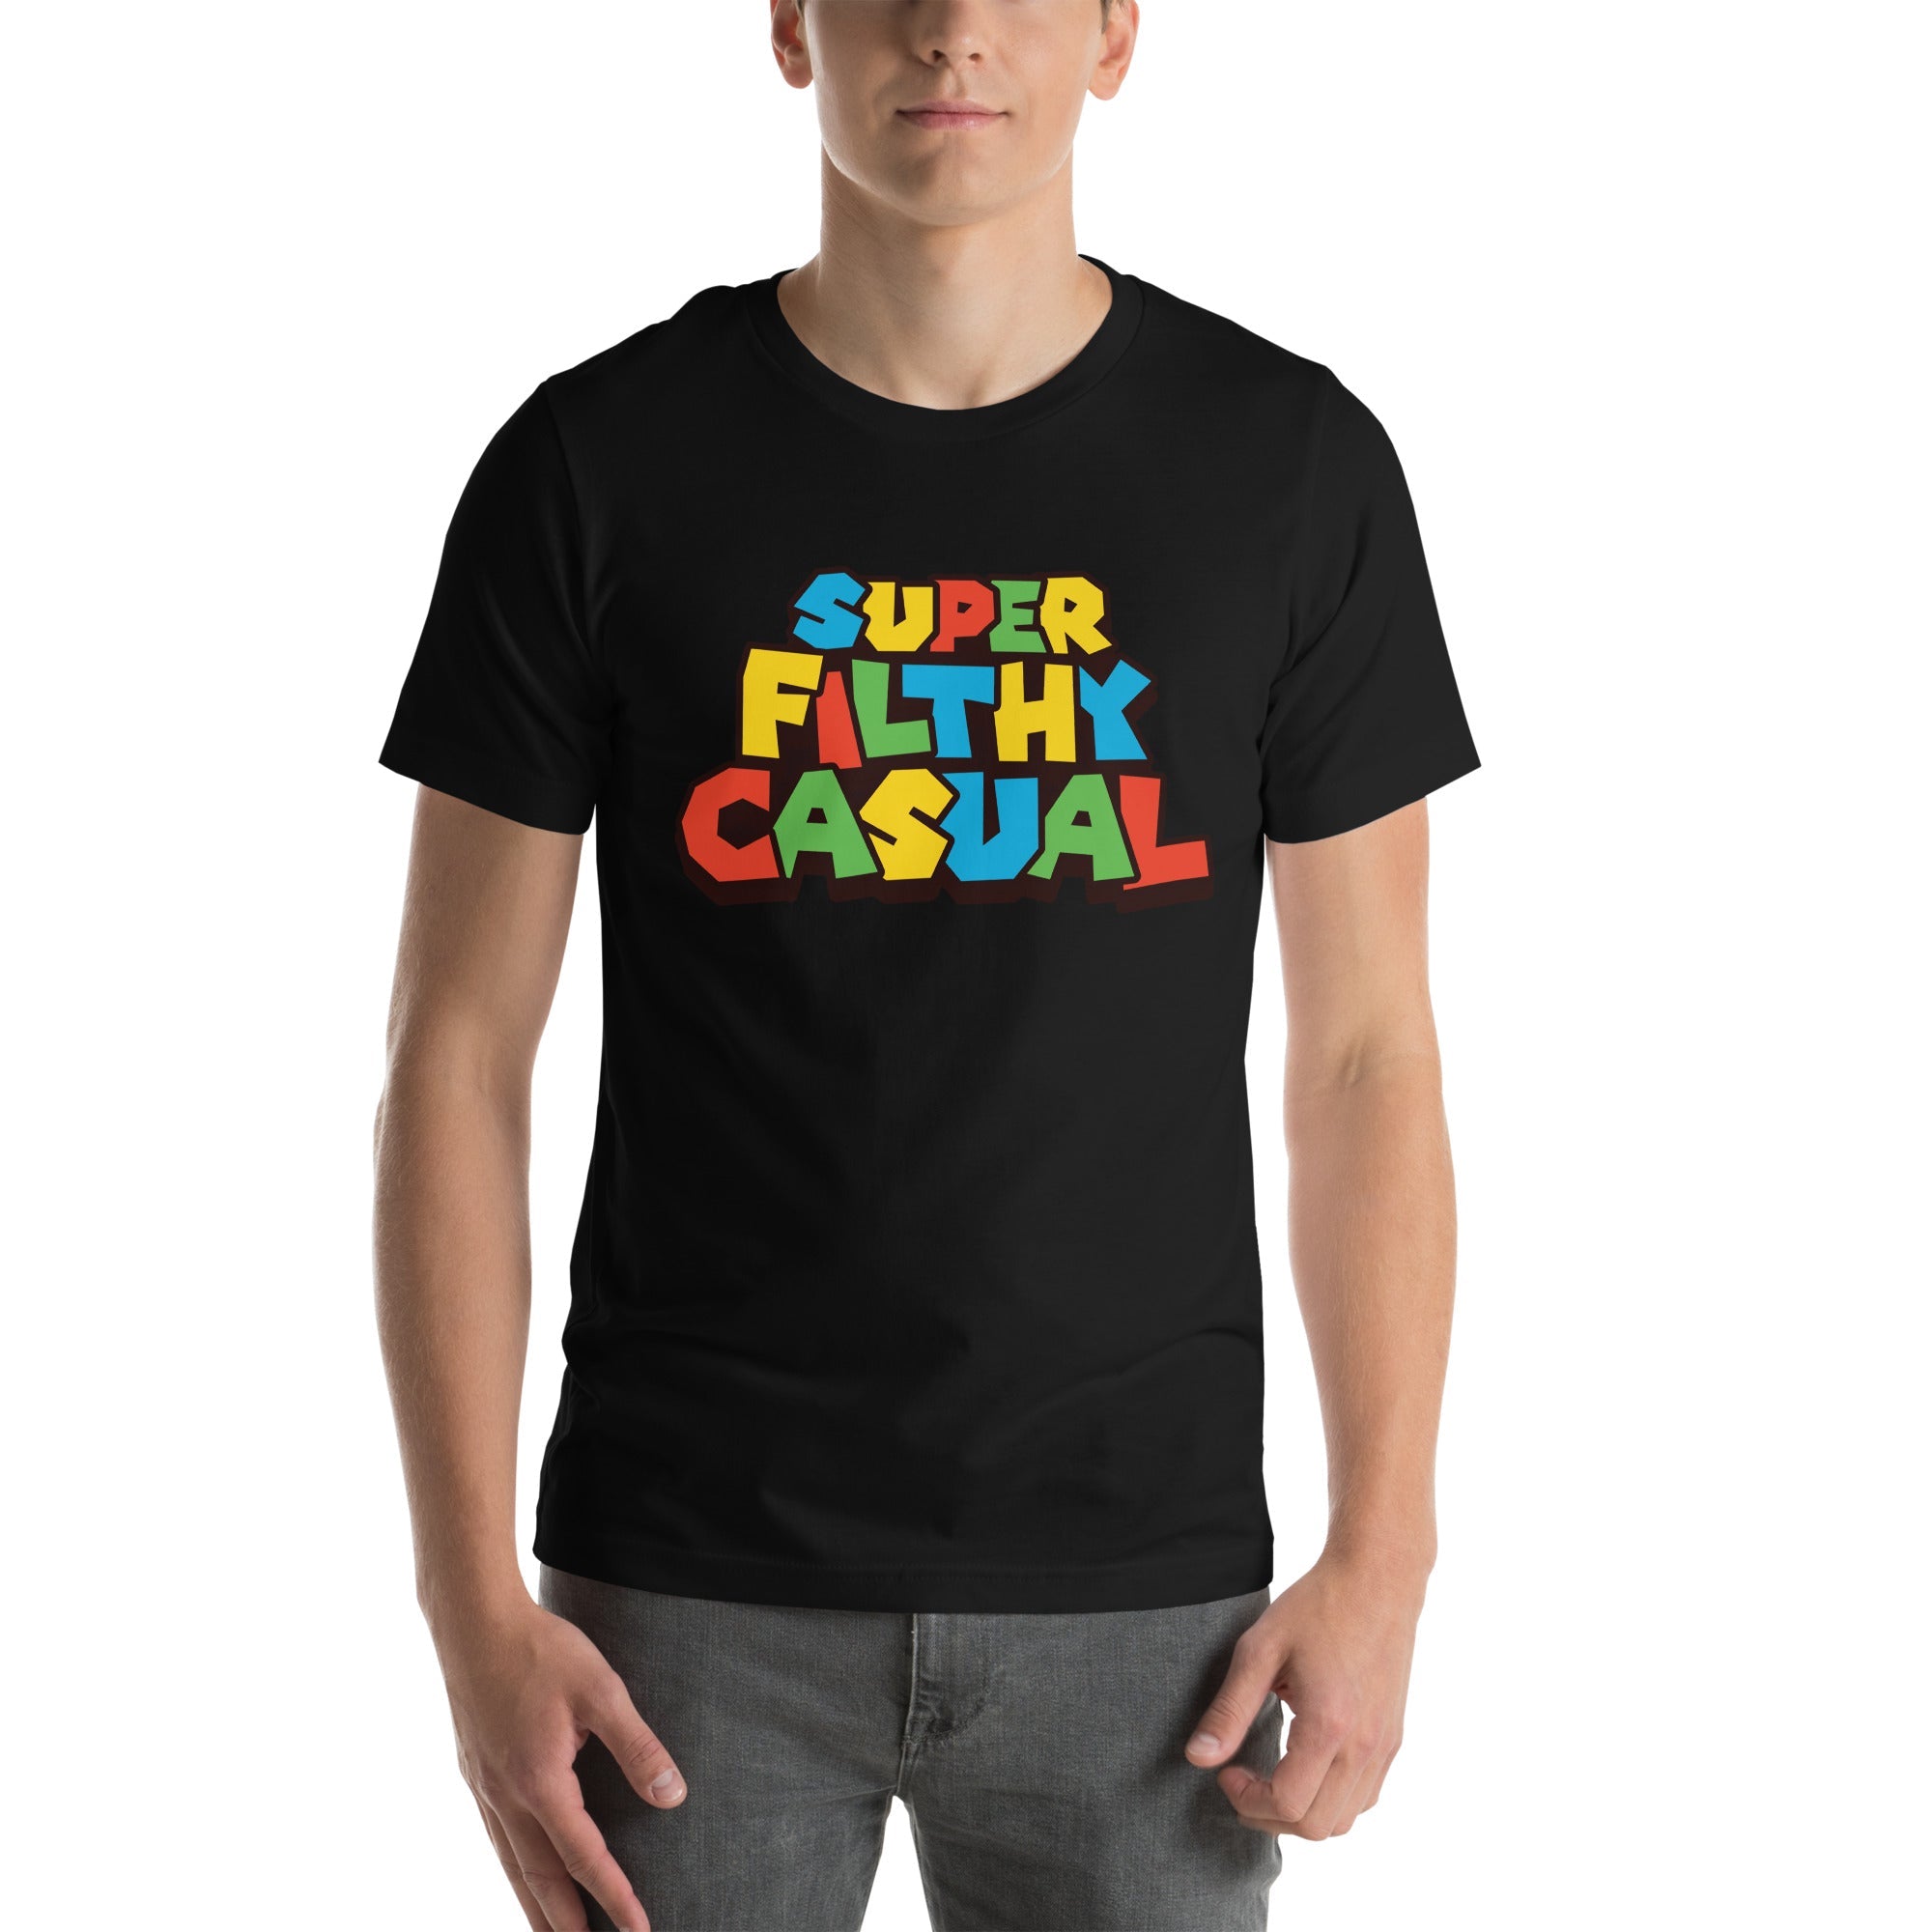 Super Filthy Casual T-Shirt - Filthy Casual Co.